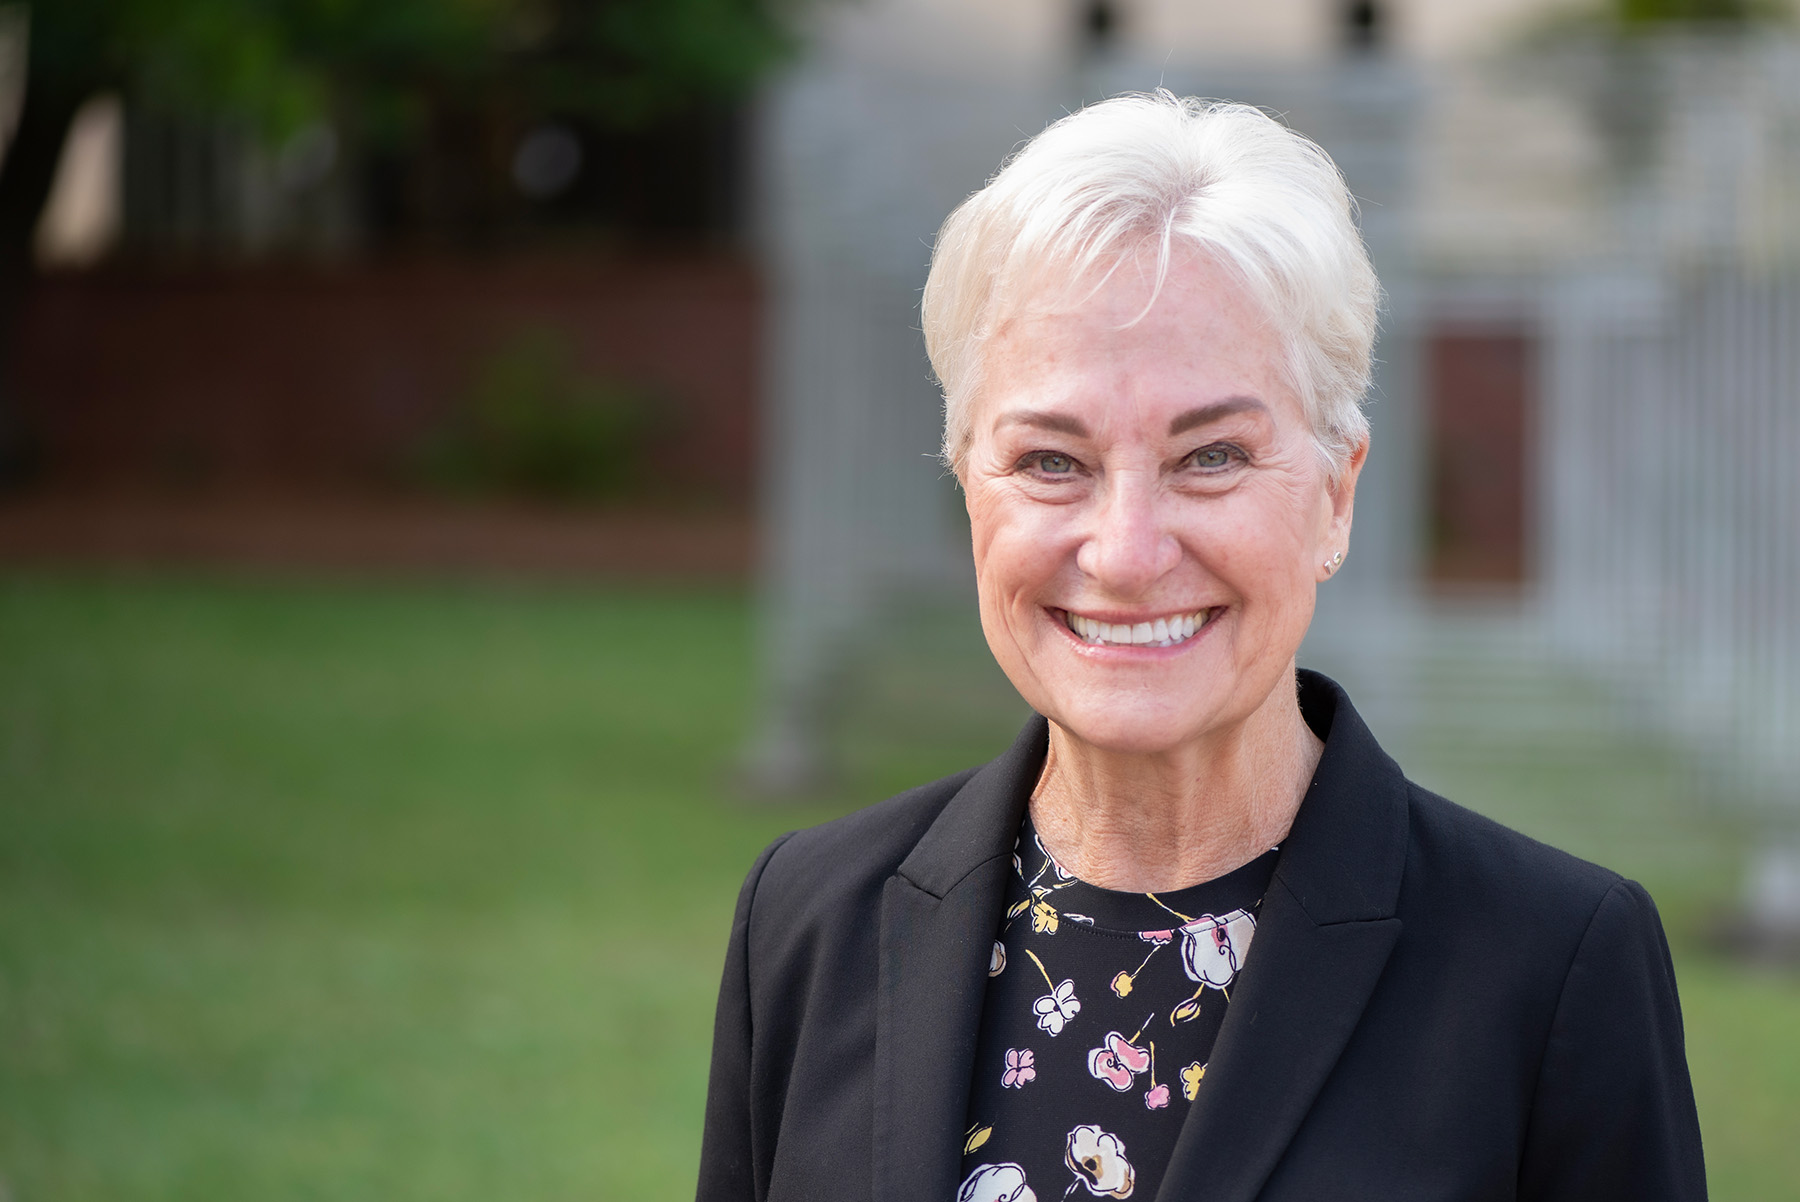 Yvonne Baker takes on the title of Brett C. Lindquist Executive Director of the FSU Real Estate Center. She became executive director in April 2021 (Photo by Kallen Lunt/College of Business).